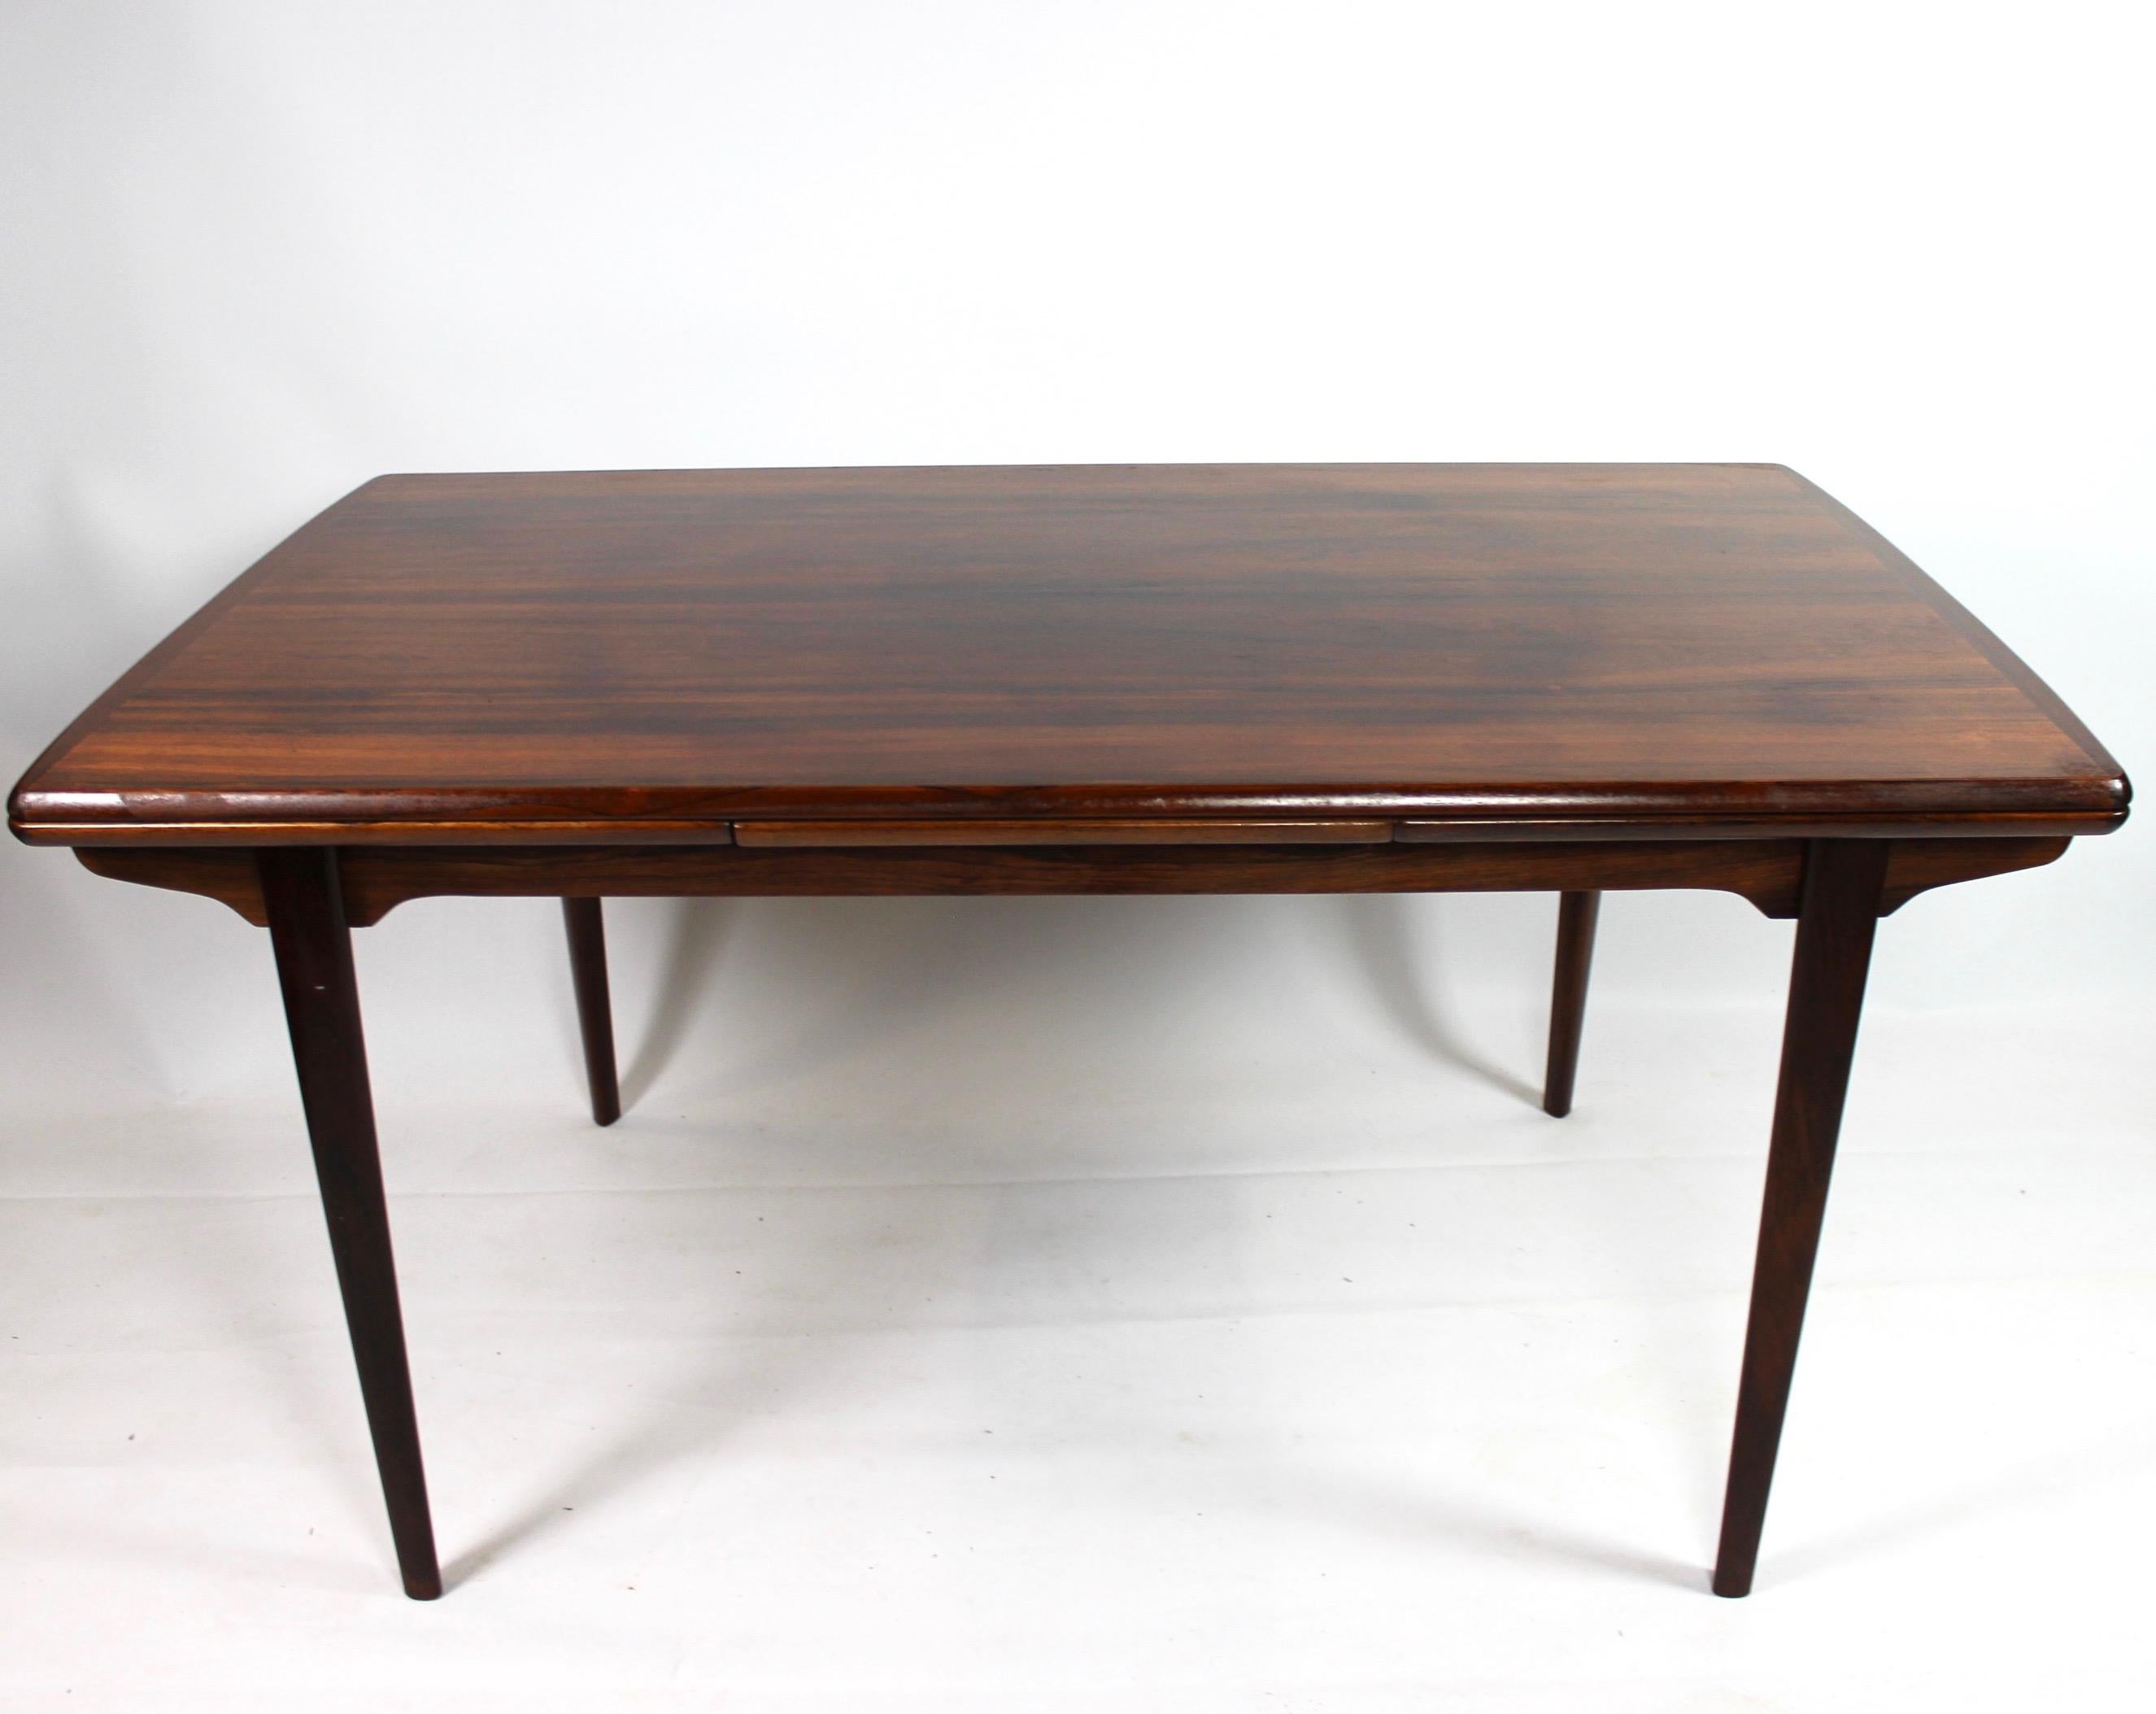 Dining table of rosewood with Dutch extension designed by Arne Vodder from the 1960s. The dining table is in great vintage condition. Total length is 240cm. Each extension plate is 50cm. The shortest length is 140cm. It is a table of very high